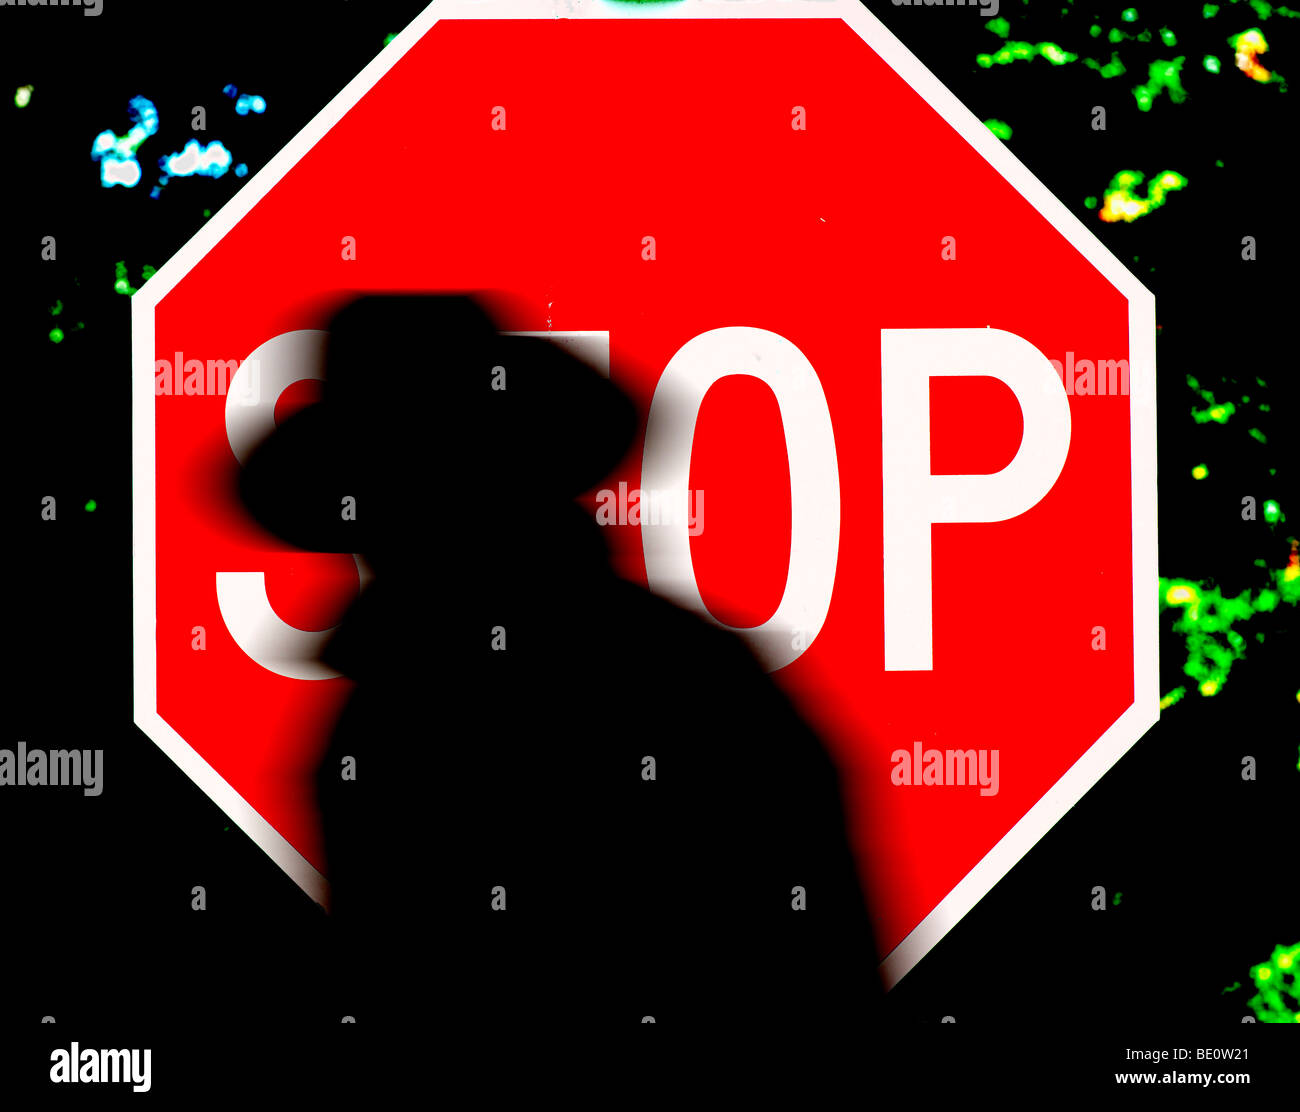 bad guy silhouette stop sign Stock Photo